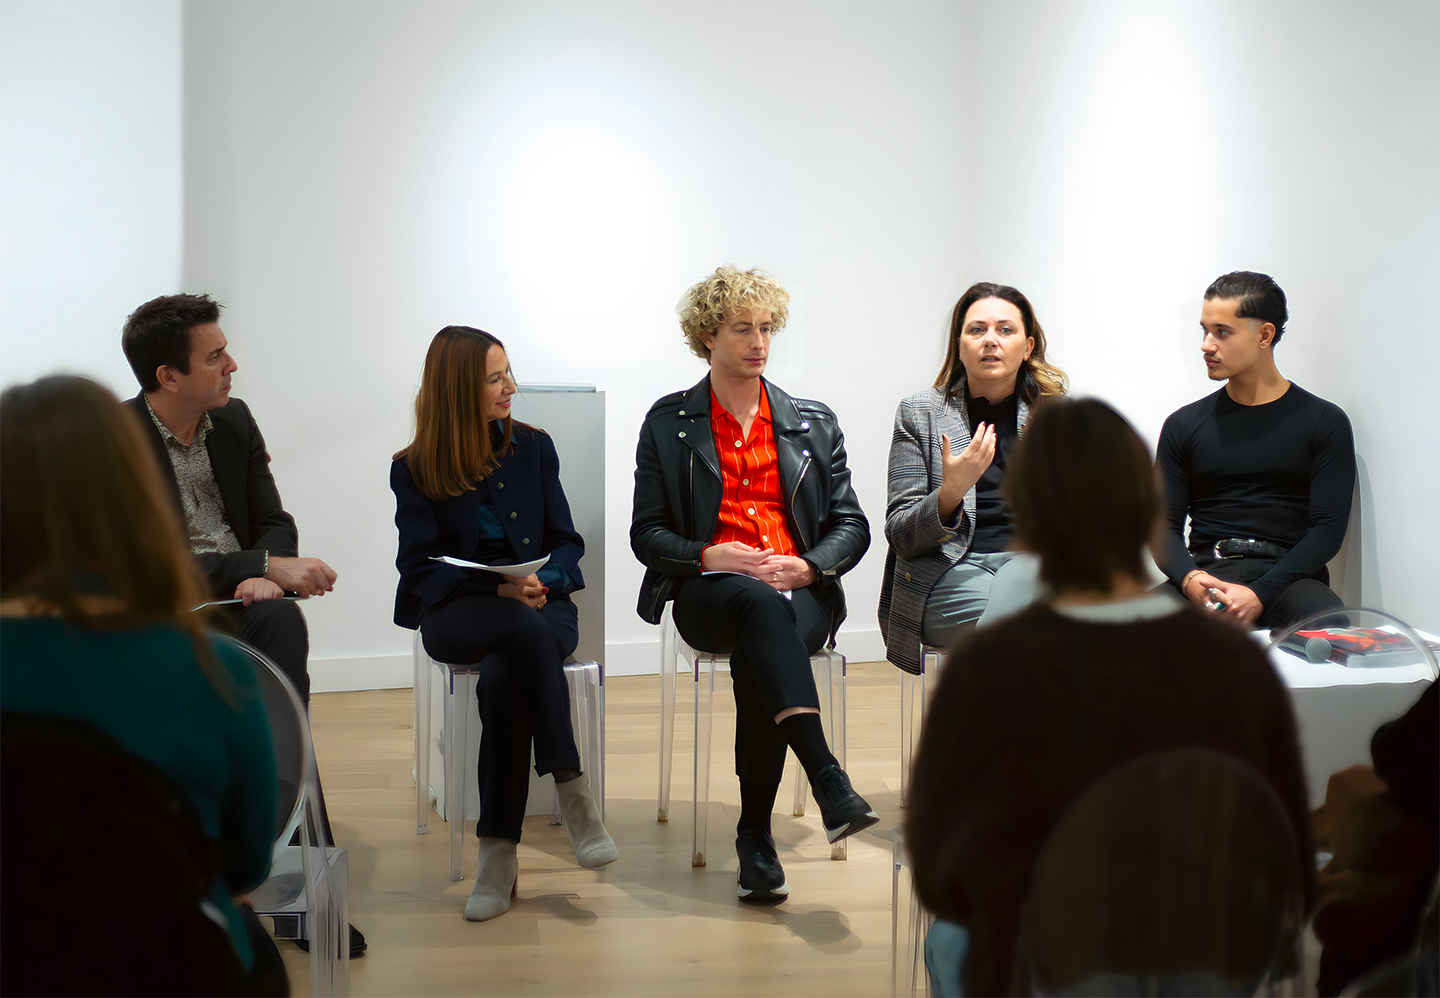 The round table organised by Istituto Marangoni Paris to mark the opening of the Rives de la Beauté international event in the French capital. From left to right, experts Wouter Wiels, Silvia Manzoni, Damien Rousseaux, Susanna Nicoletti and IM alumnus Luciano Piunti